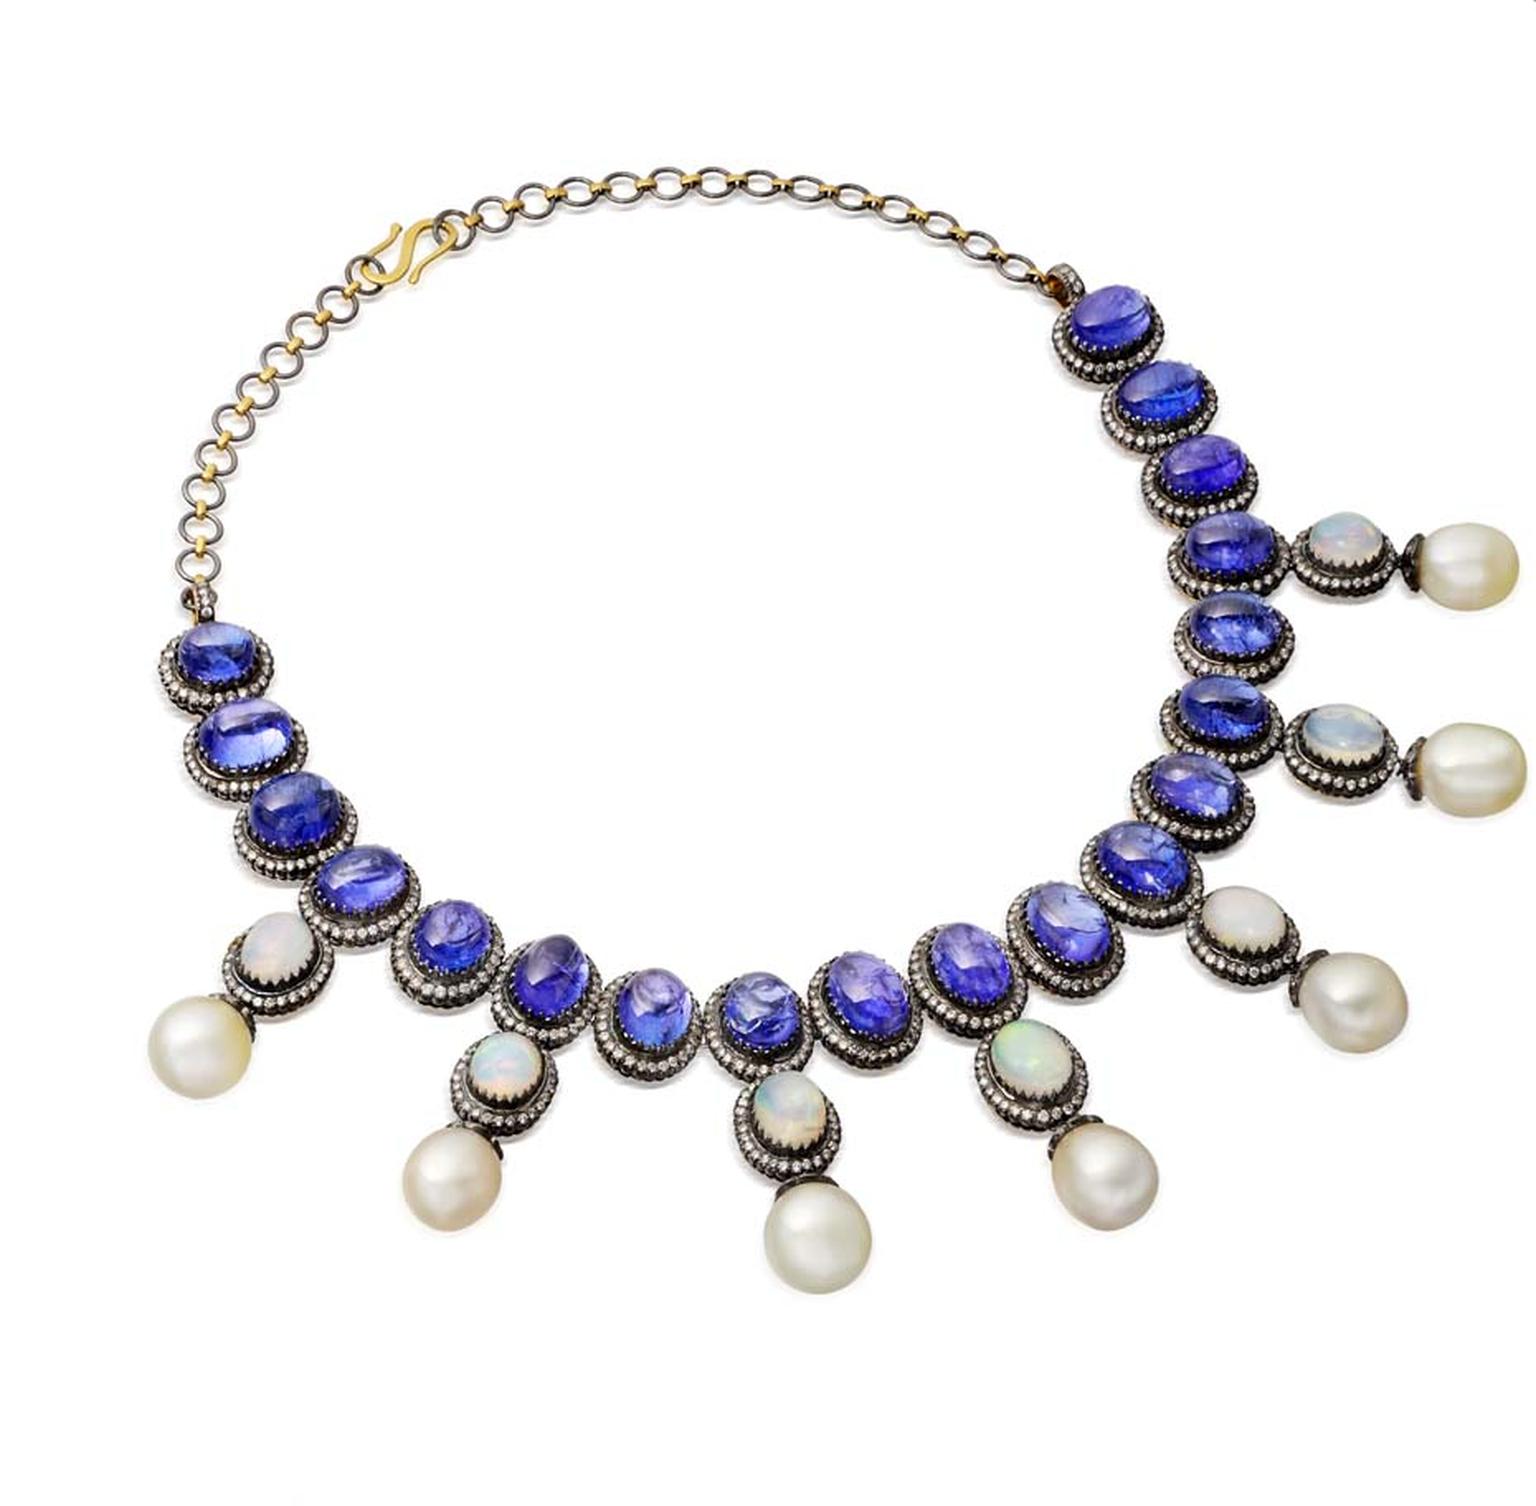 Amrapali cabochon tanzanite necklace with pearls and opals set in antique-finished gold.